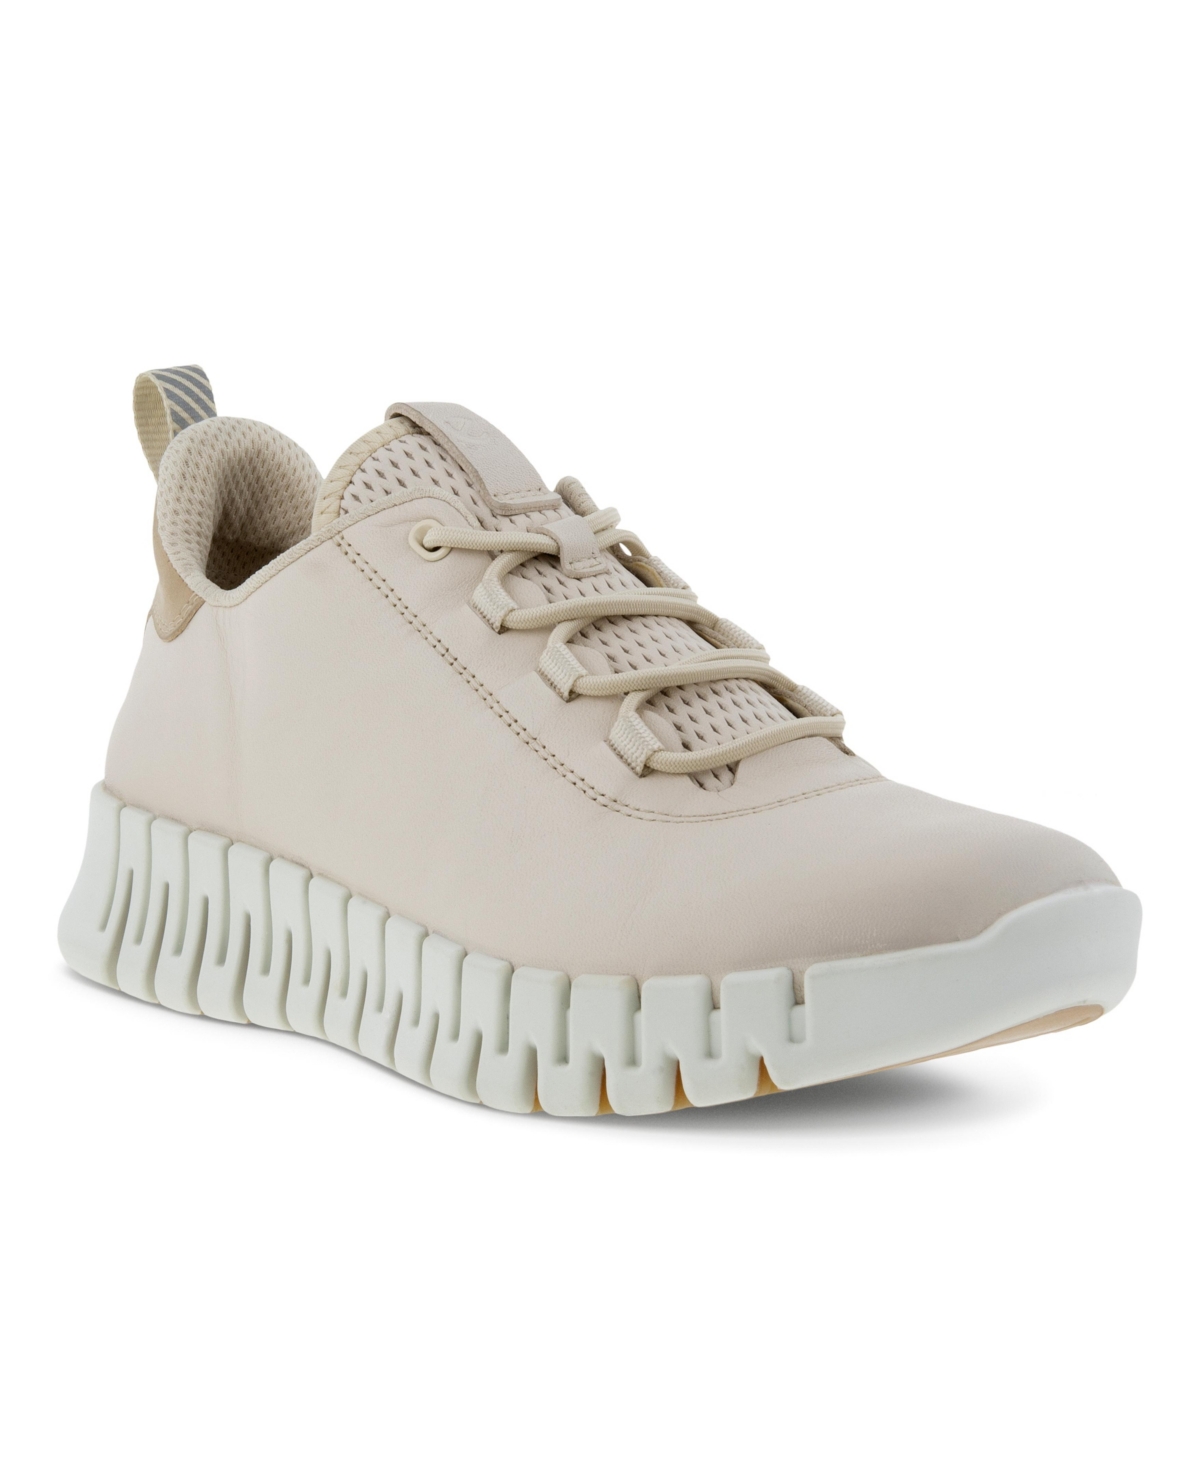 Women's Gruuv Lace Up Sneaker - Air Powder